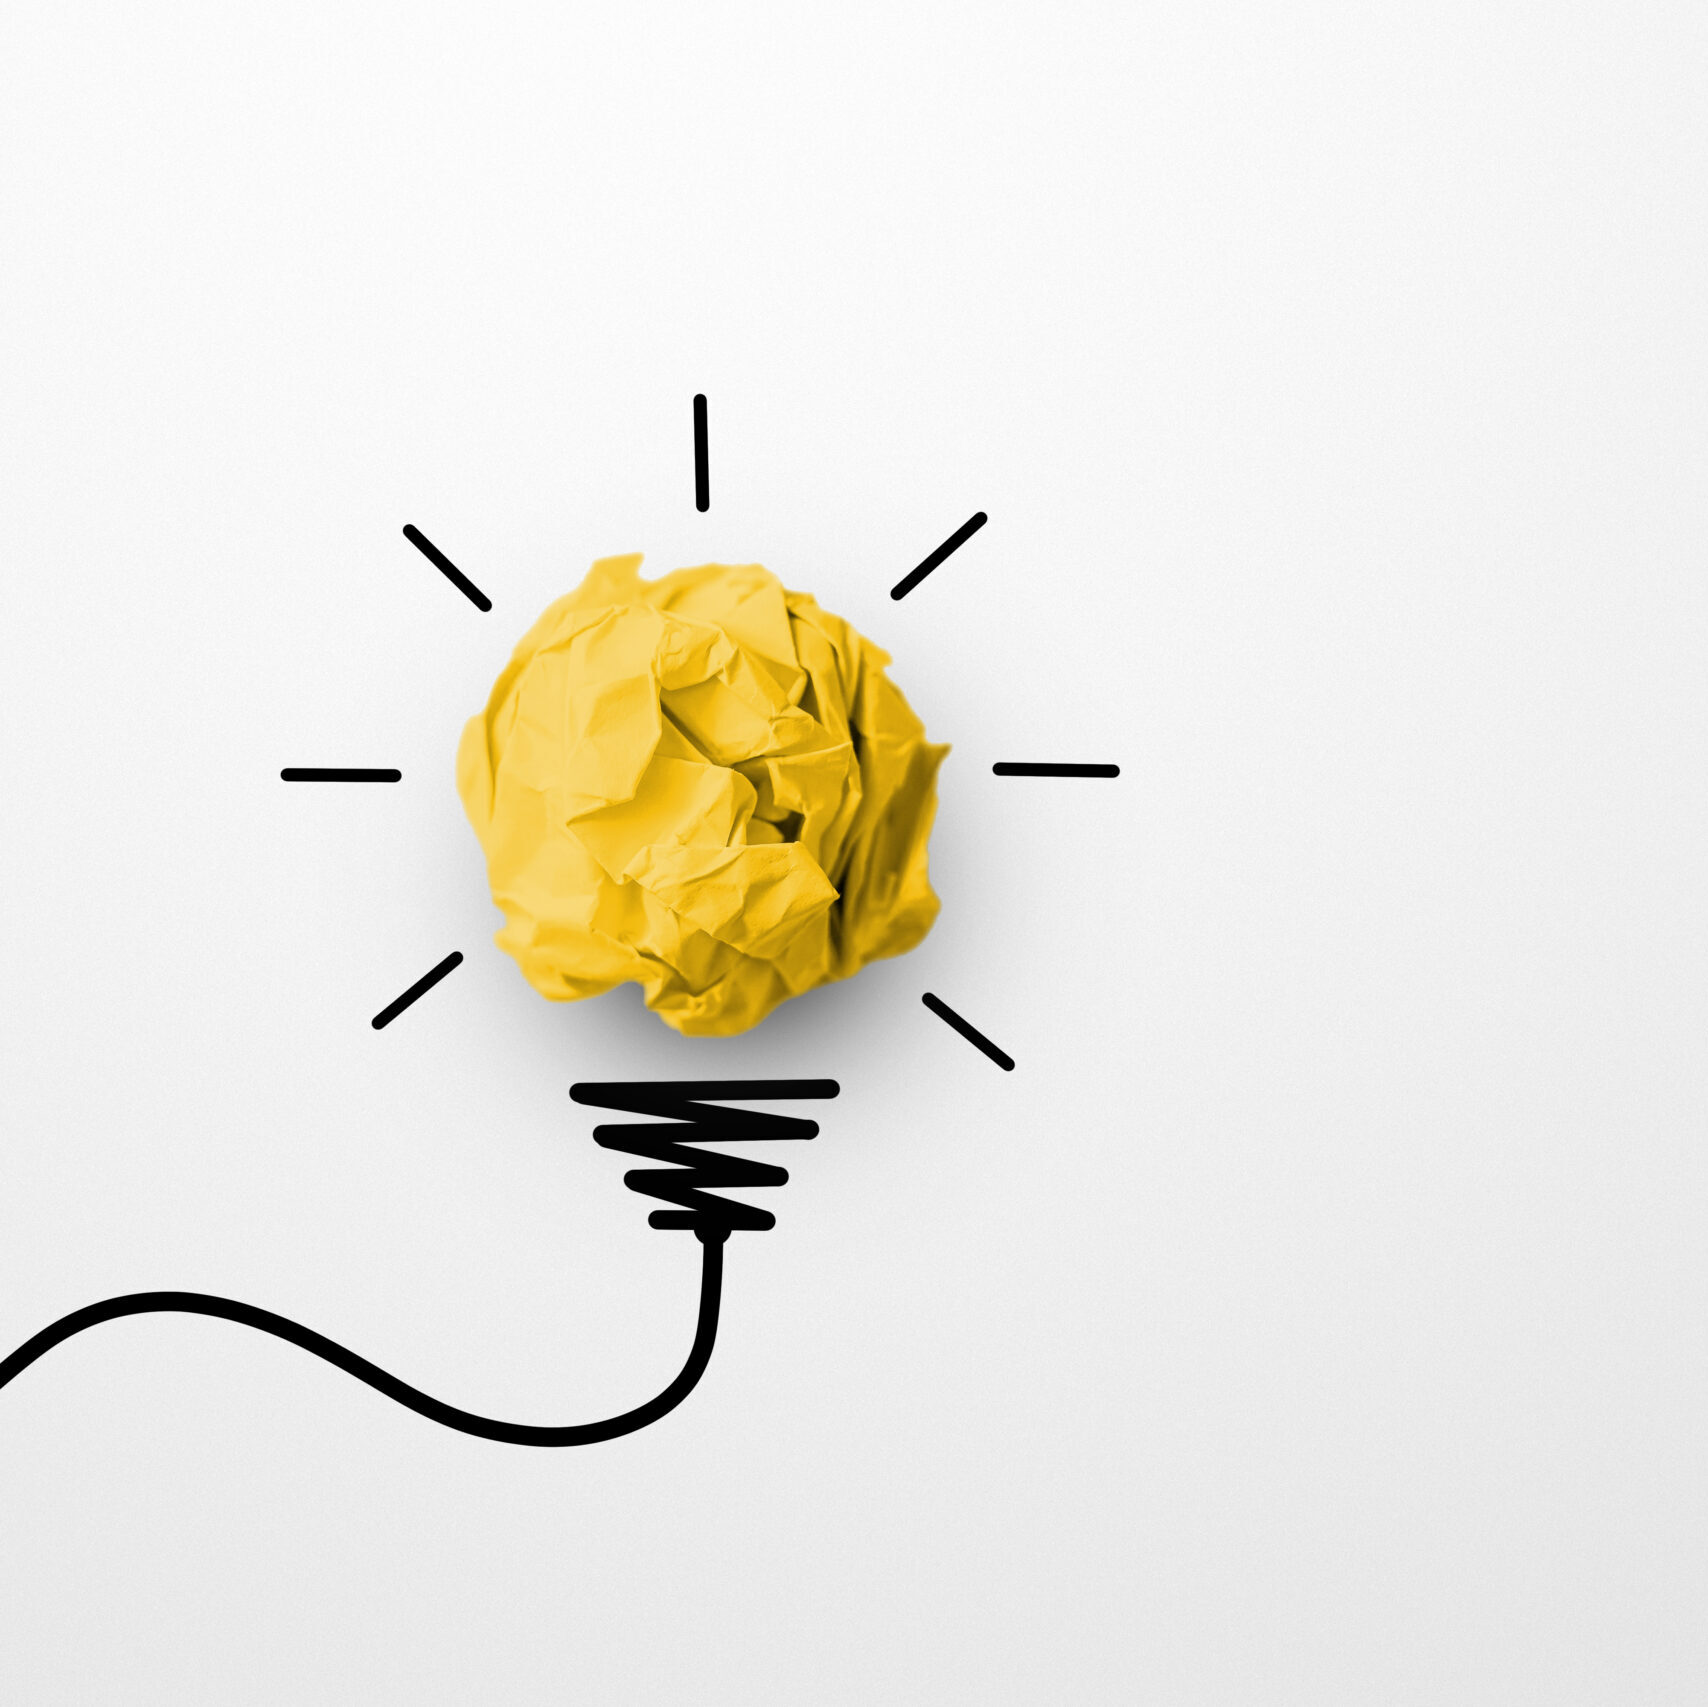 Crumpled yellow paper being drawn into a lightbulb.